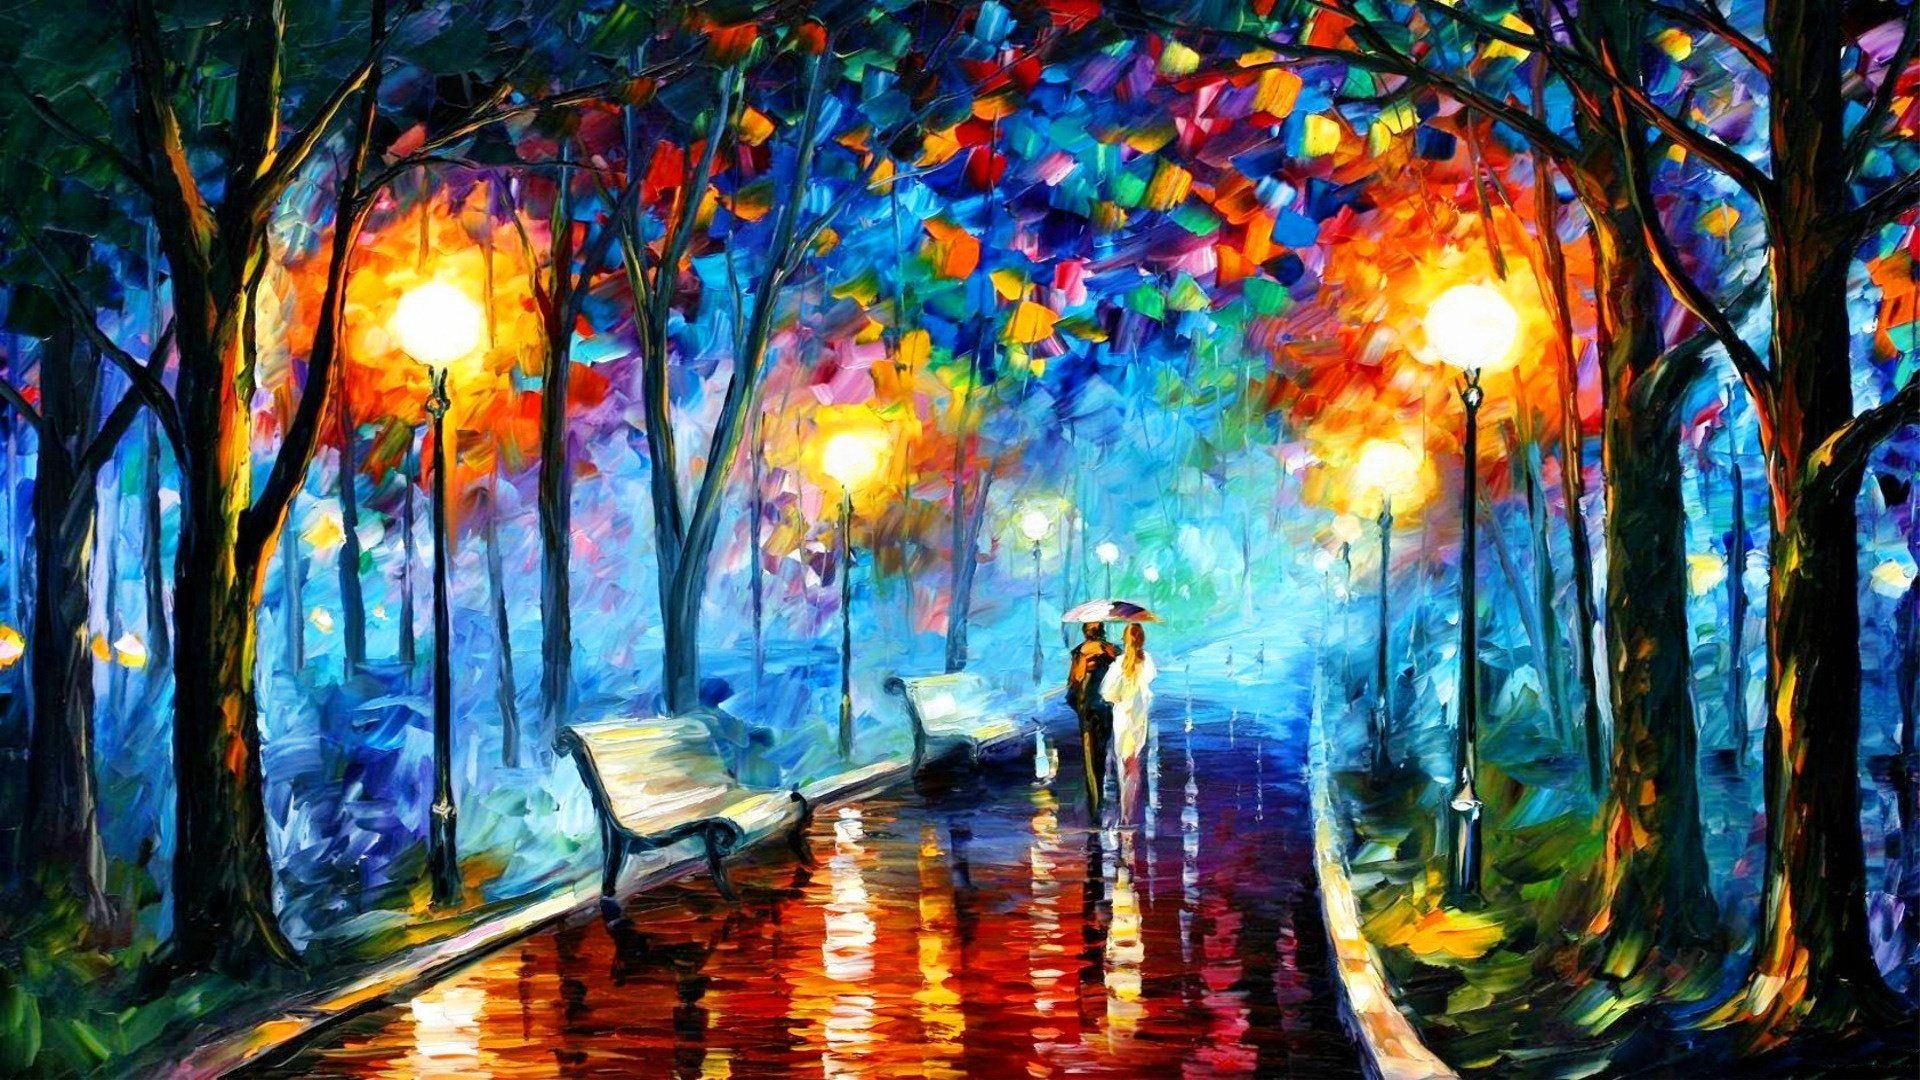 1920x1080 Wallpapers famous painting artist painter brush oil on canvas awesome 242